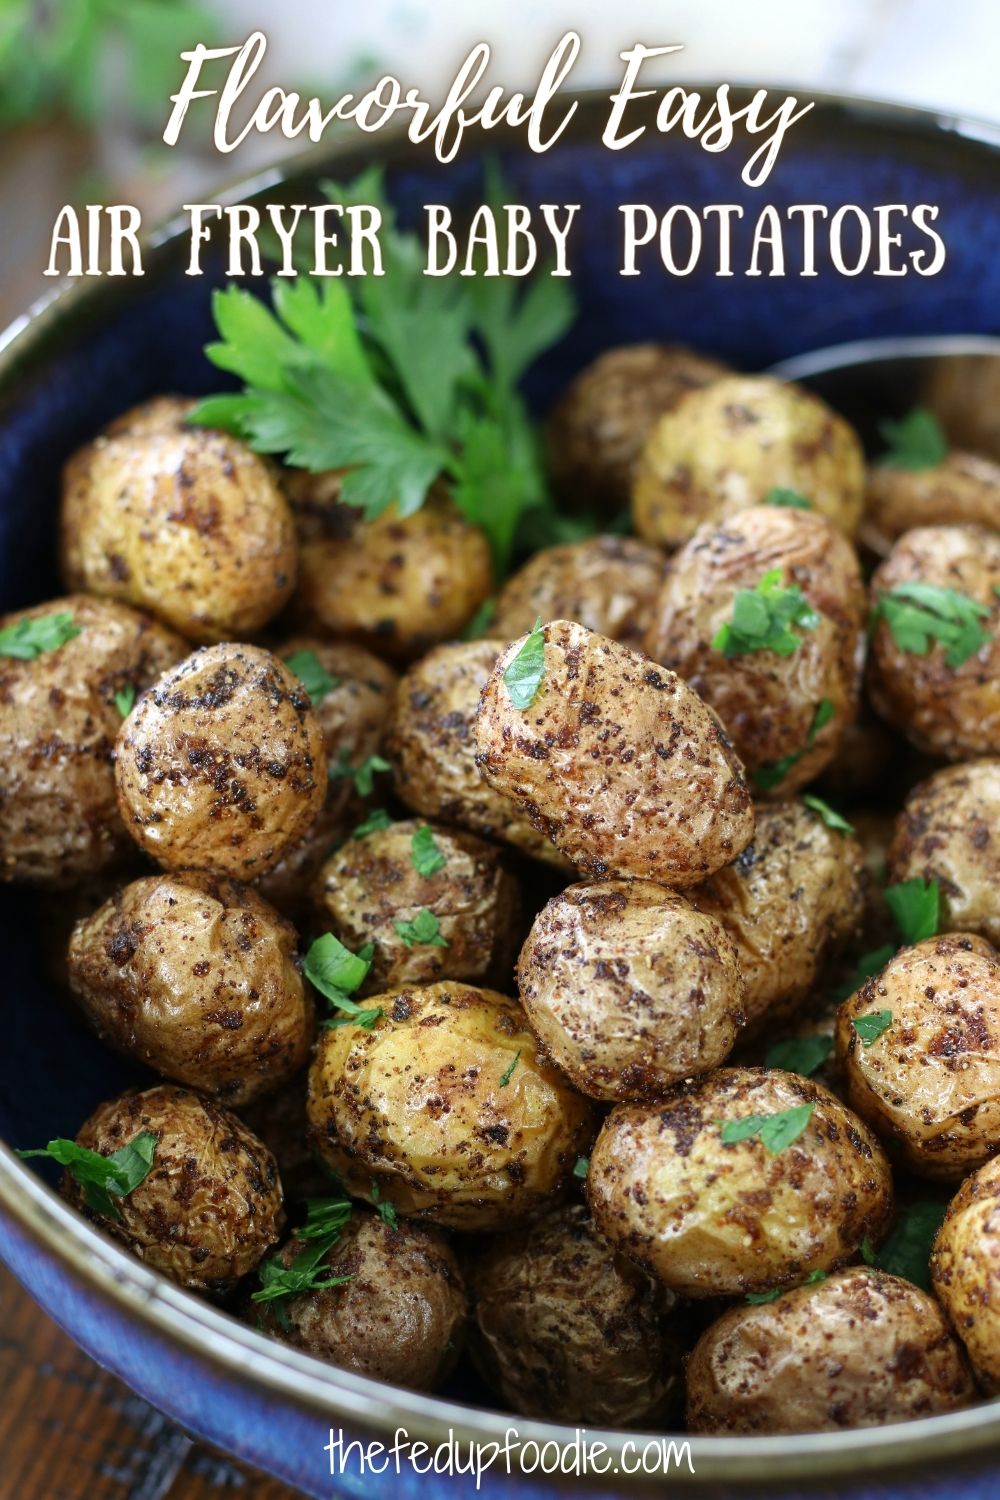 This Air Fryer Baby Potatoes recipe creates flavorful potatoes that are slightly crispy on the outside and tender on the inside. An incredibly easy side dish that is wonderful served with all kinds of main dishes. #AirFryerRecipes #AirFryerPotatoes #AirFryerBabyPotatoes #SmallPotatoesInAirFryer #LittlePotatoesInAirFryer